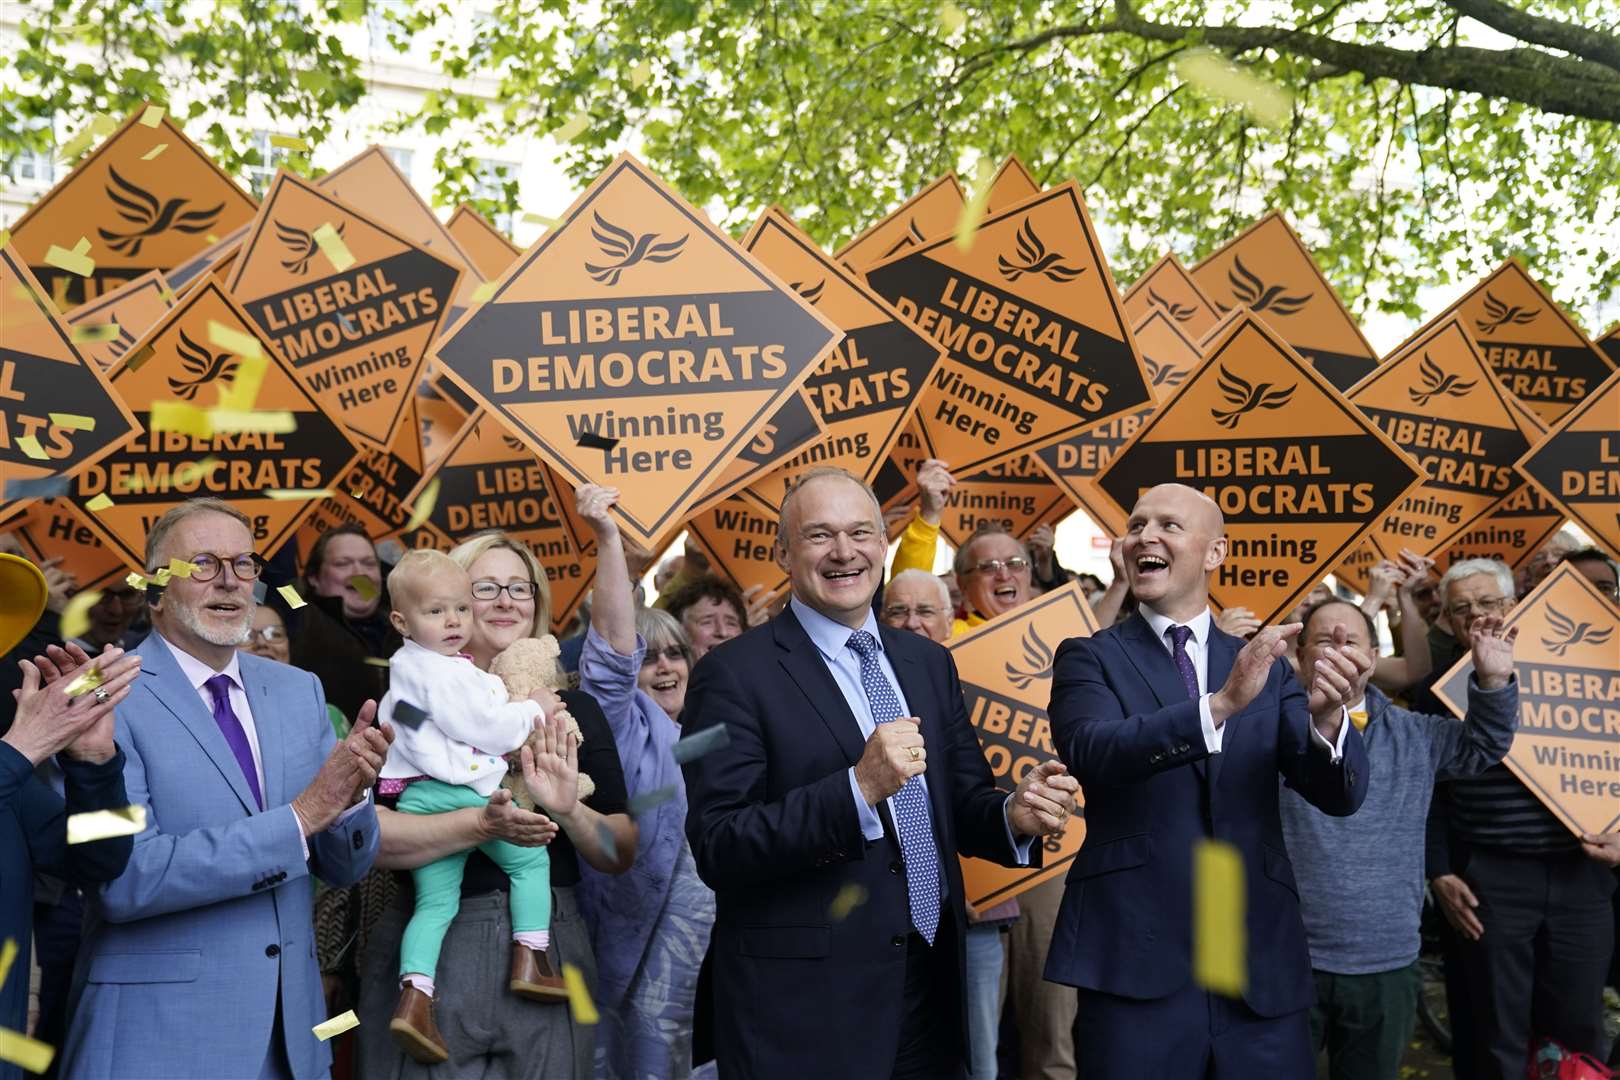 Sir Ed Davey also had young supporters at his side as the Liberal Democrat leader visited Cheltenham (Andrew Matthews/PA)